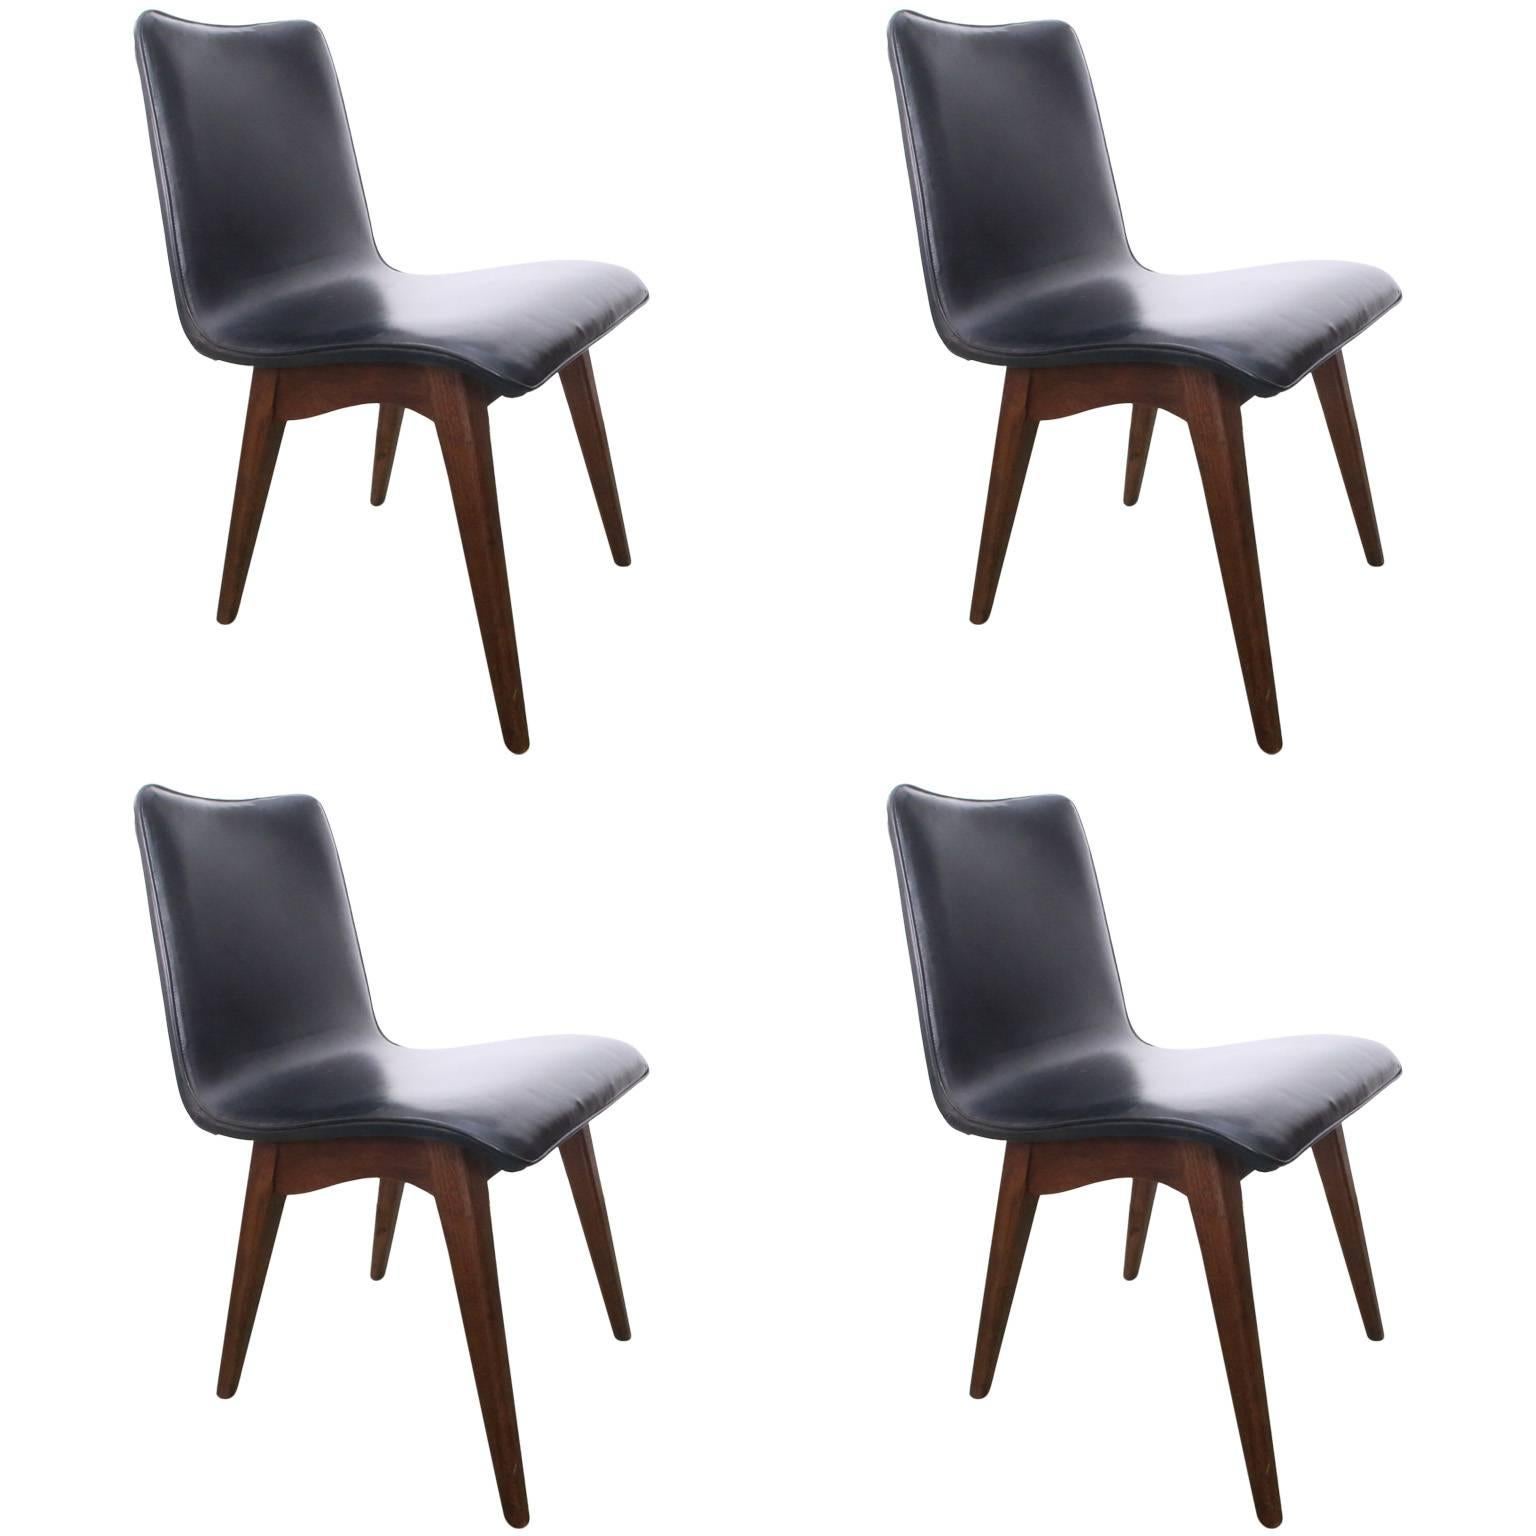 Set of Four Sligh Lowry Mid-Century Walnut and Leather Dining Chairs